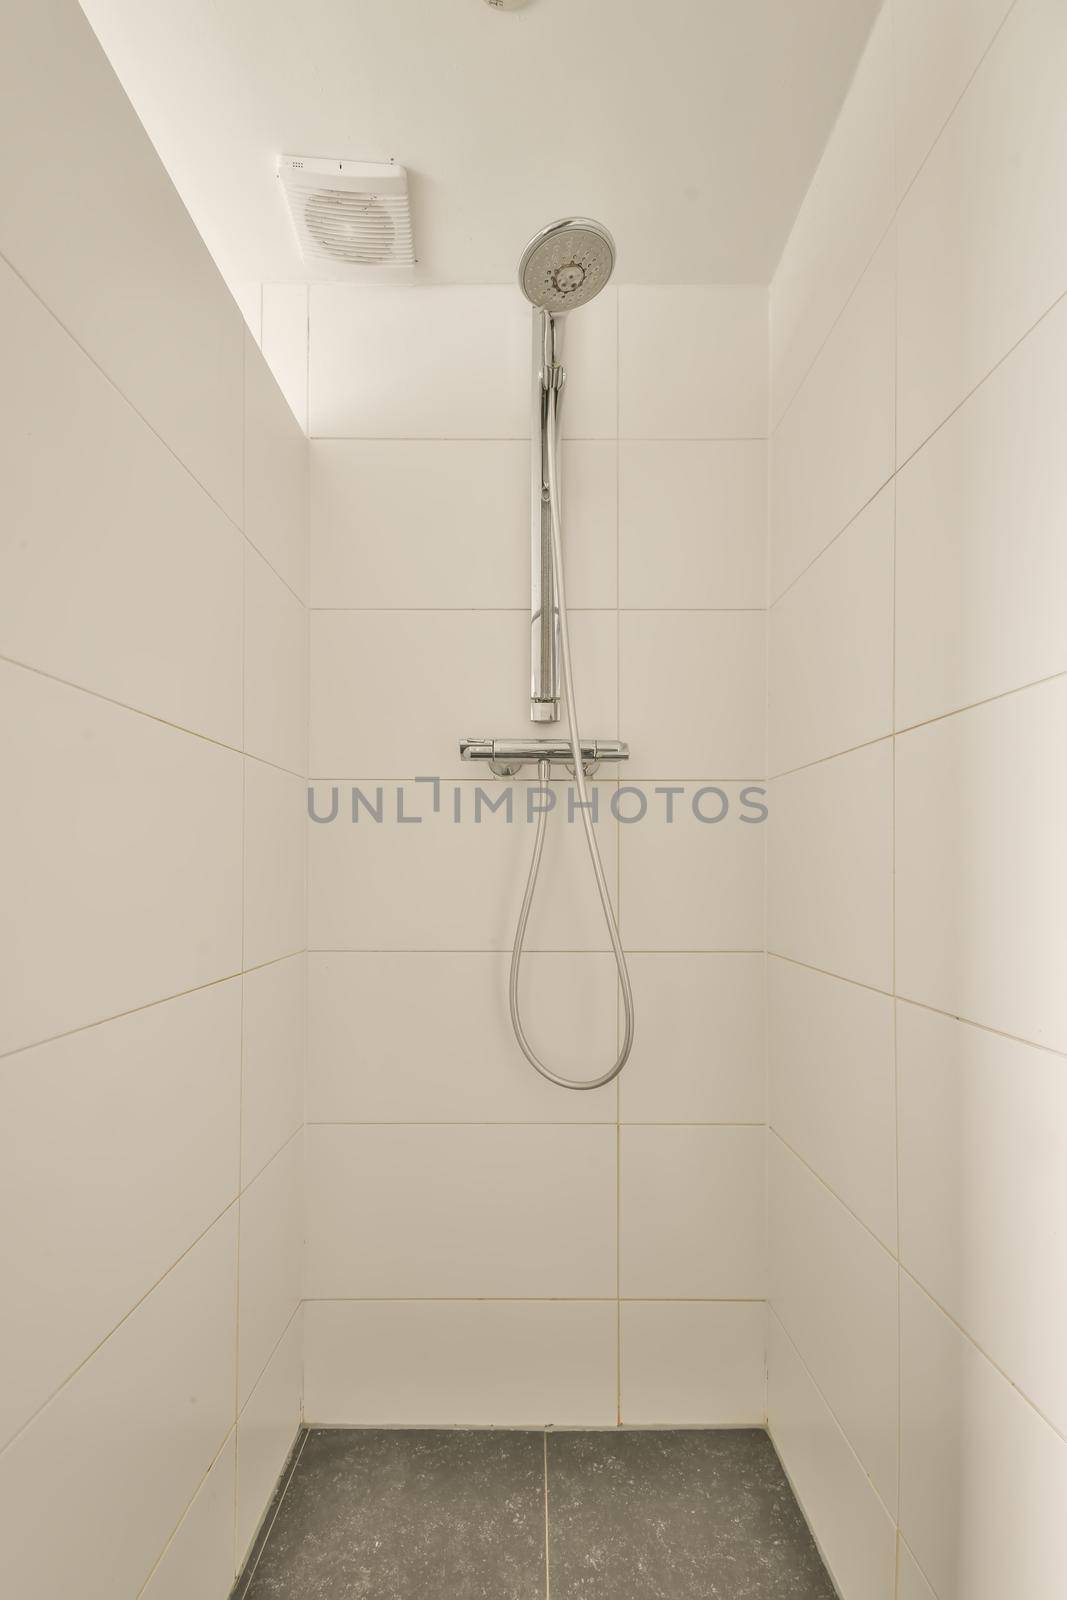 The interior of a shower cabin decorated with white and black tiles in a modern house